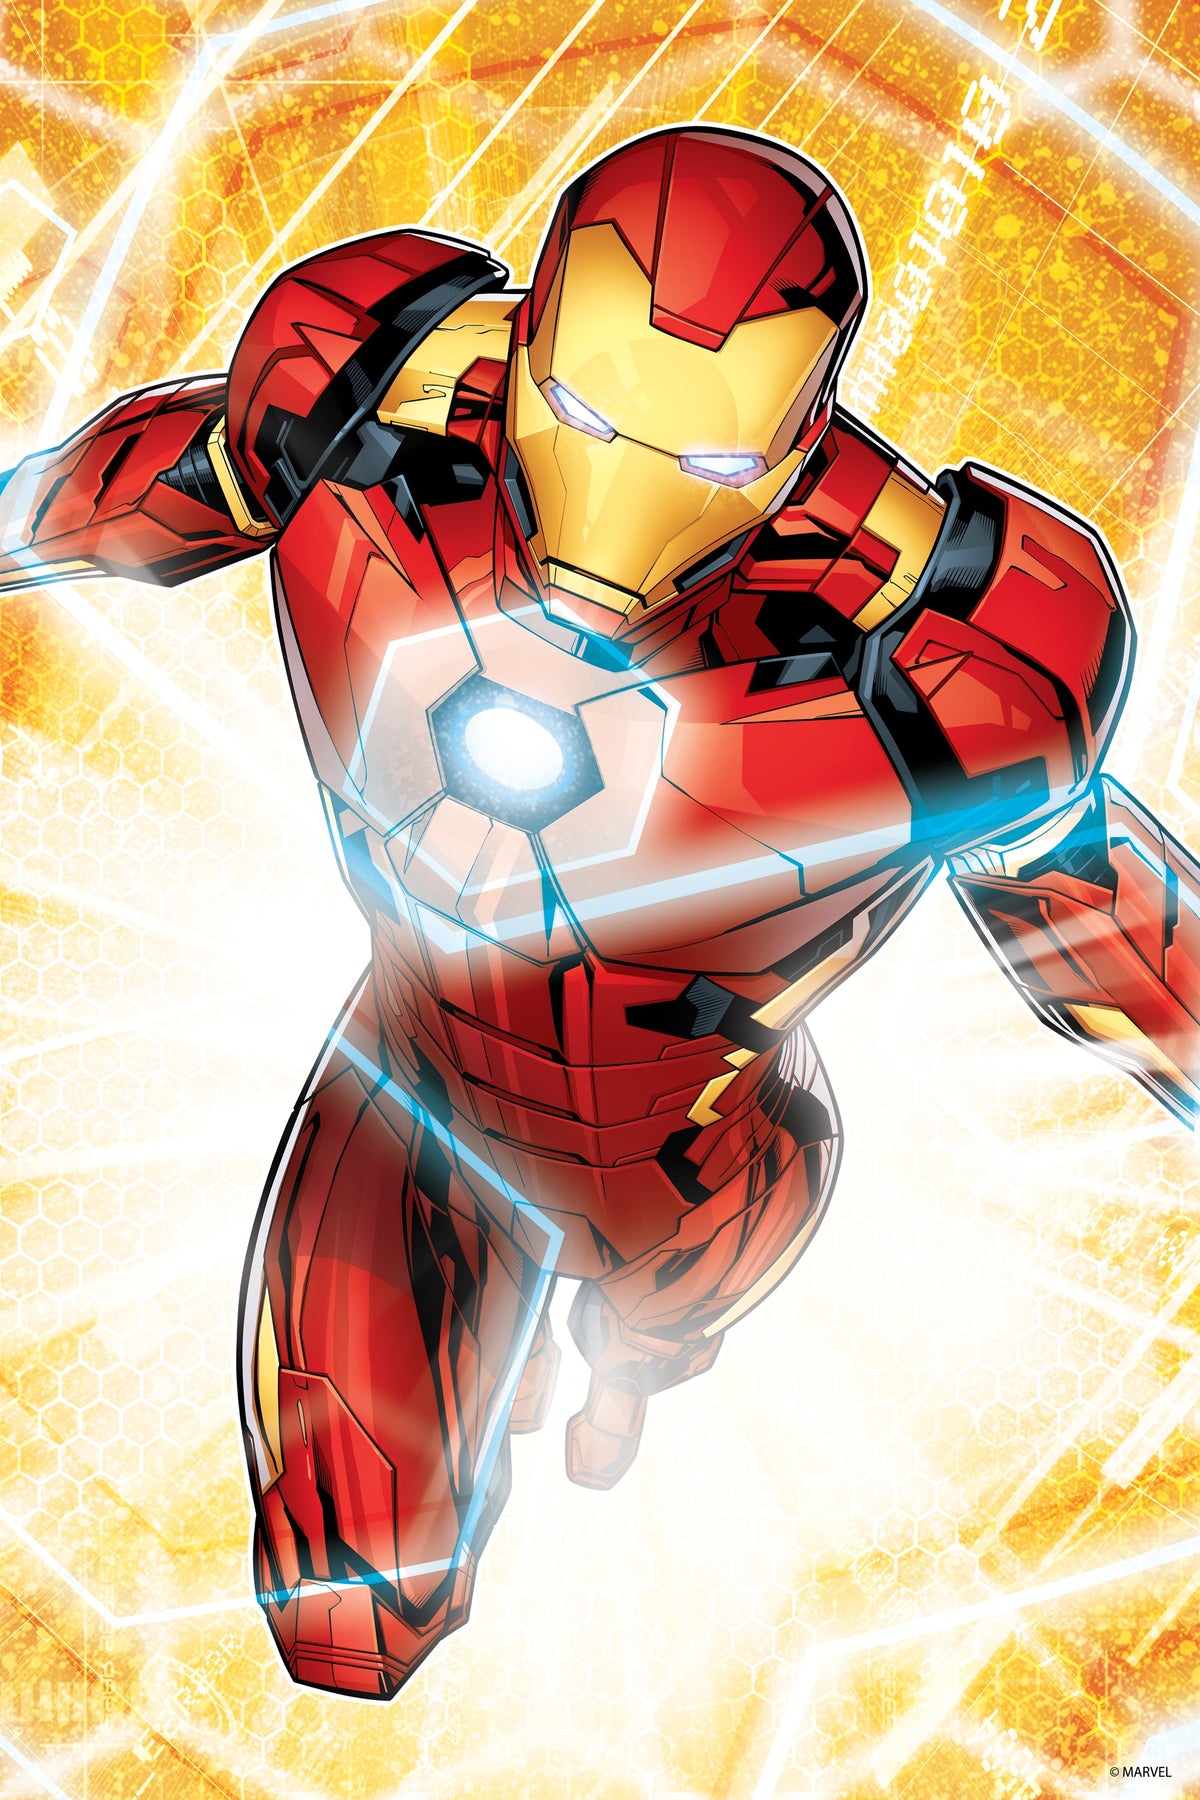 Ironman Marvel 3D Jigsaw Puzzle in Tin Box Packaging 35585 300pc 12x18"